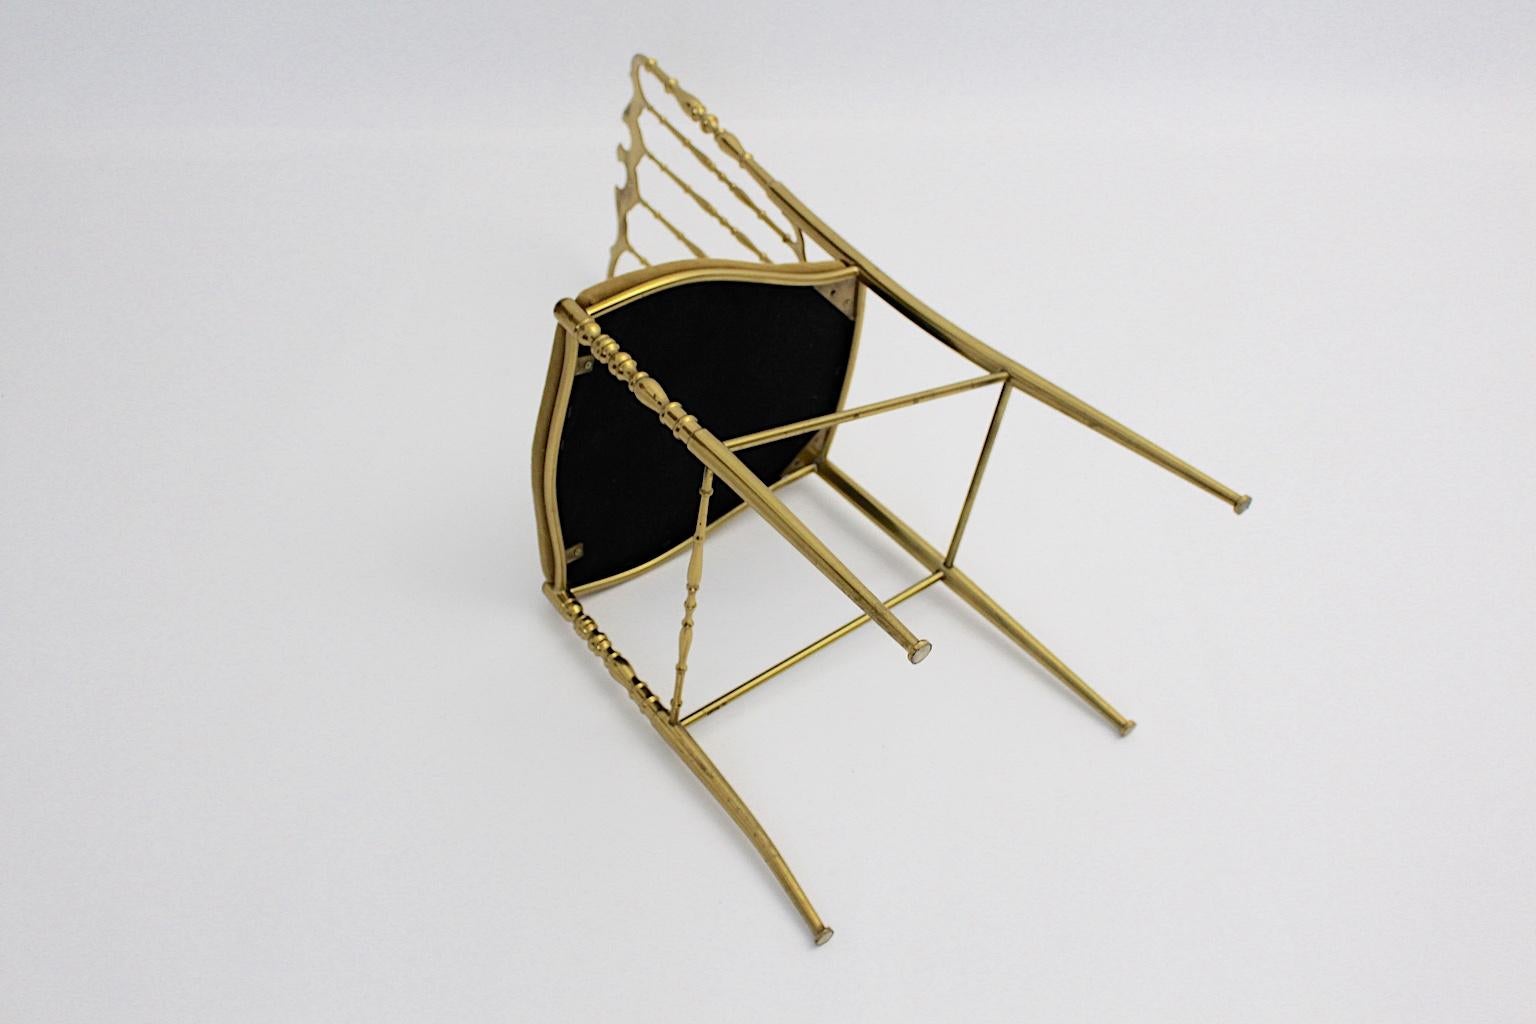 20th Century Mid-Century Modern Vintage Chiavari Brass Side Chair or Chair, 1950s, Italy For Sale